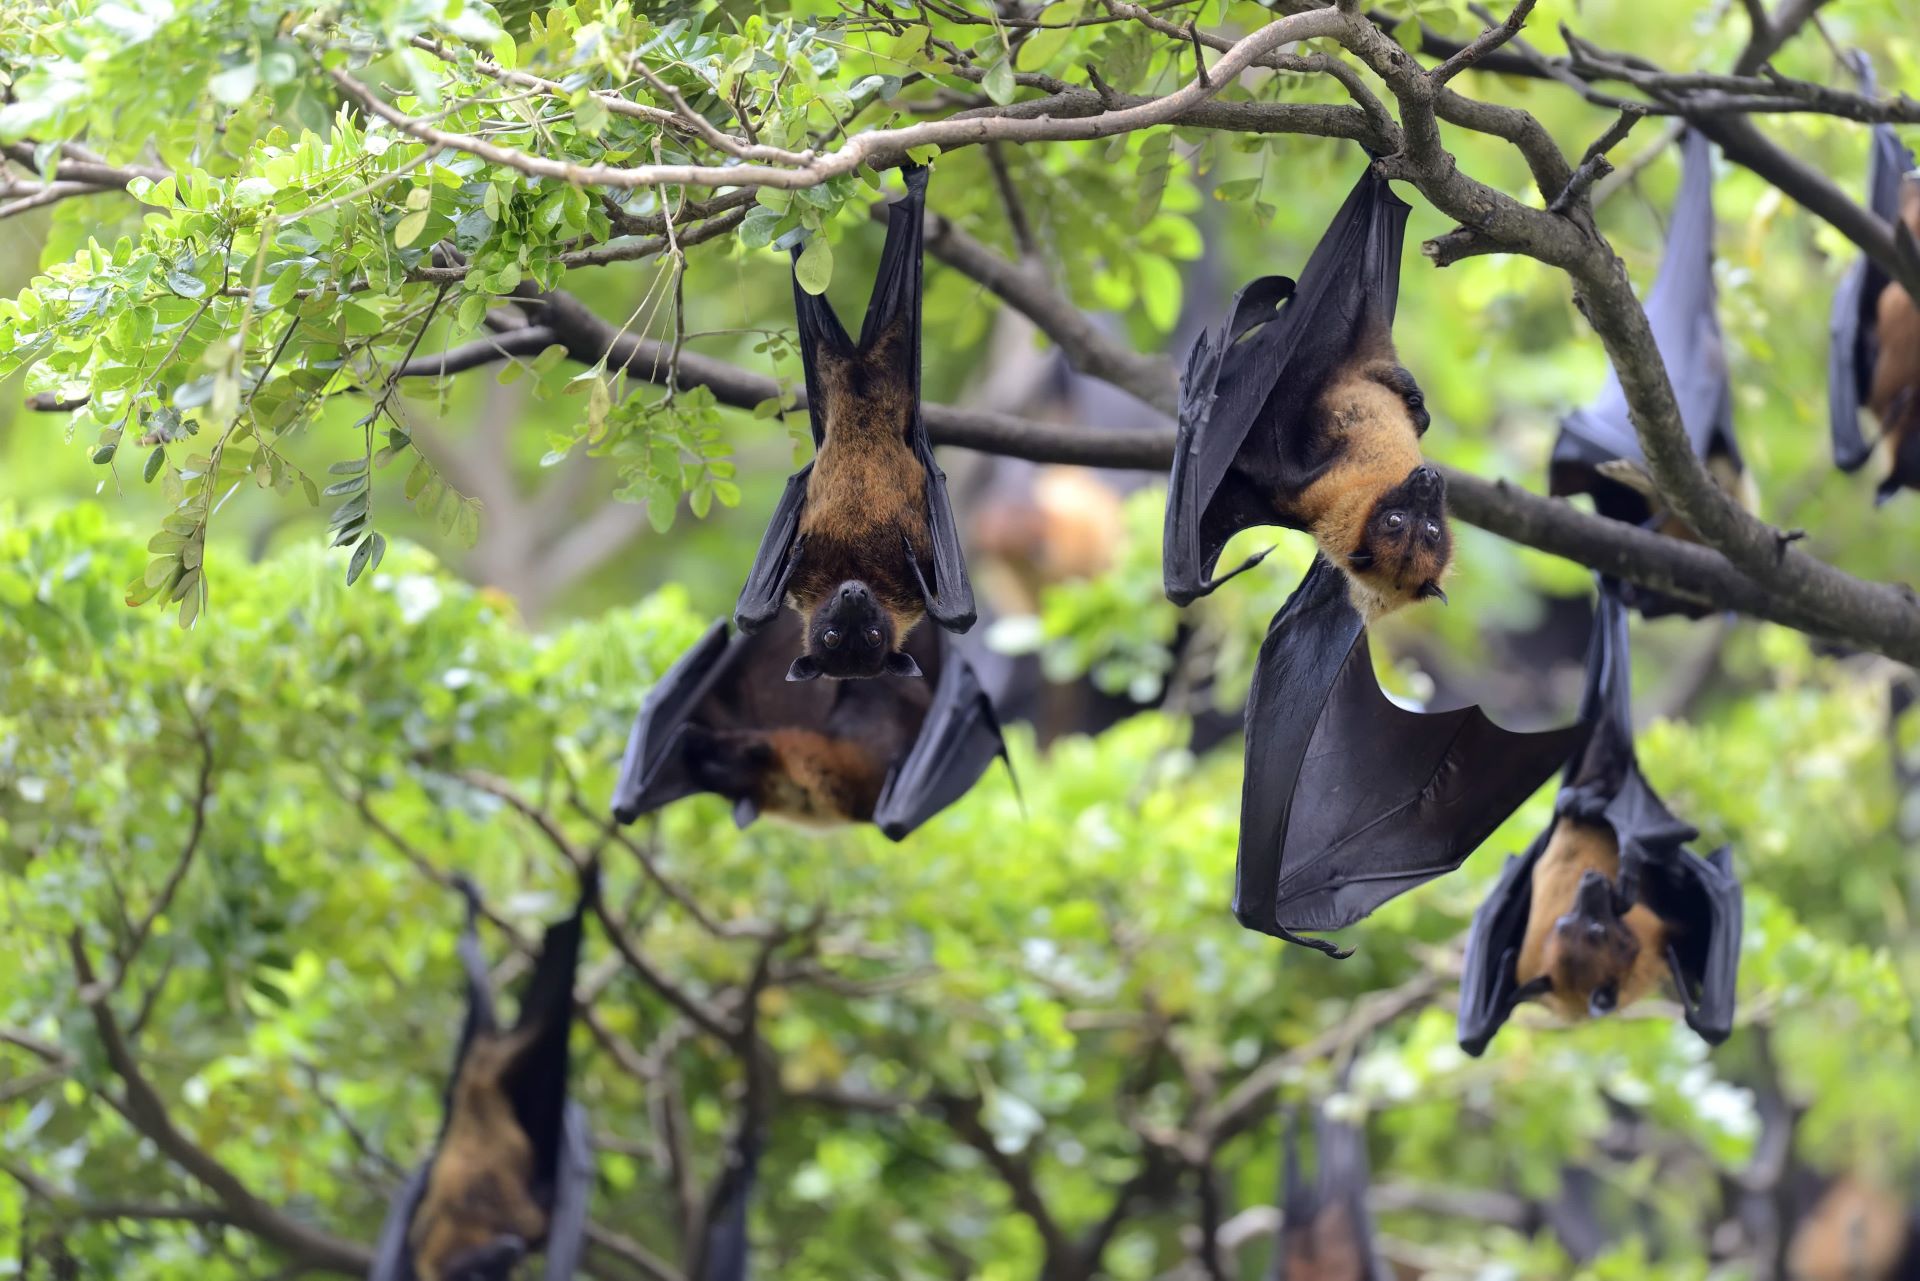 Black flying foxes (or black fruit bats) hanging from a tree